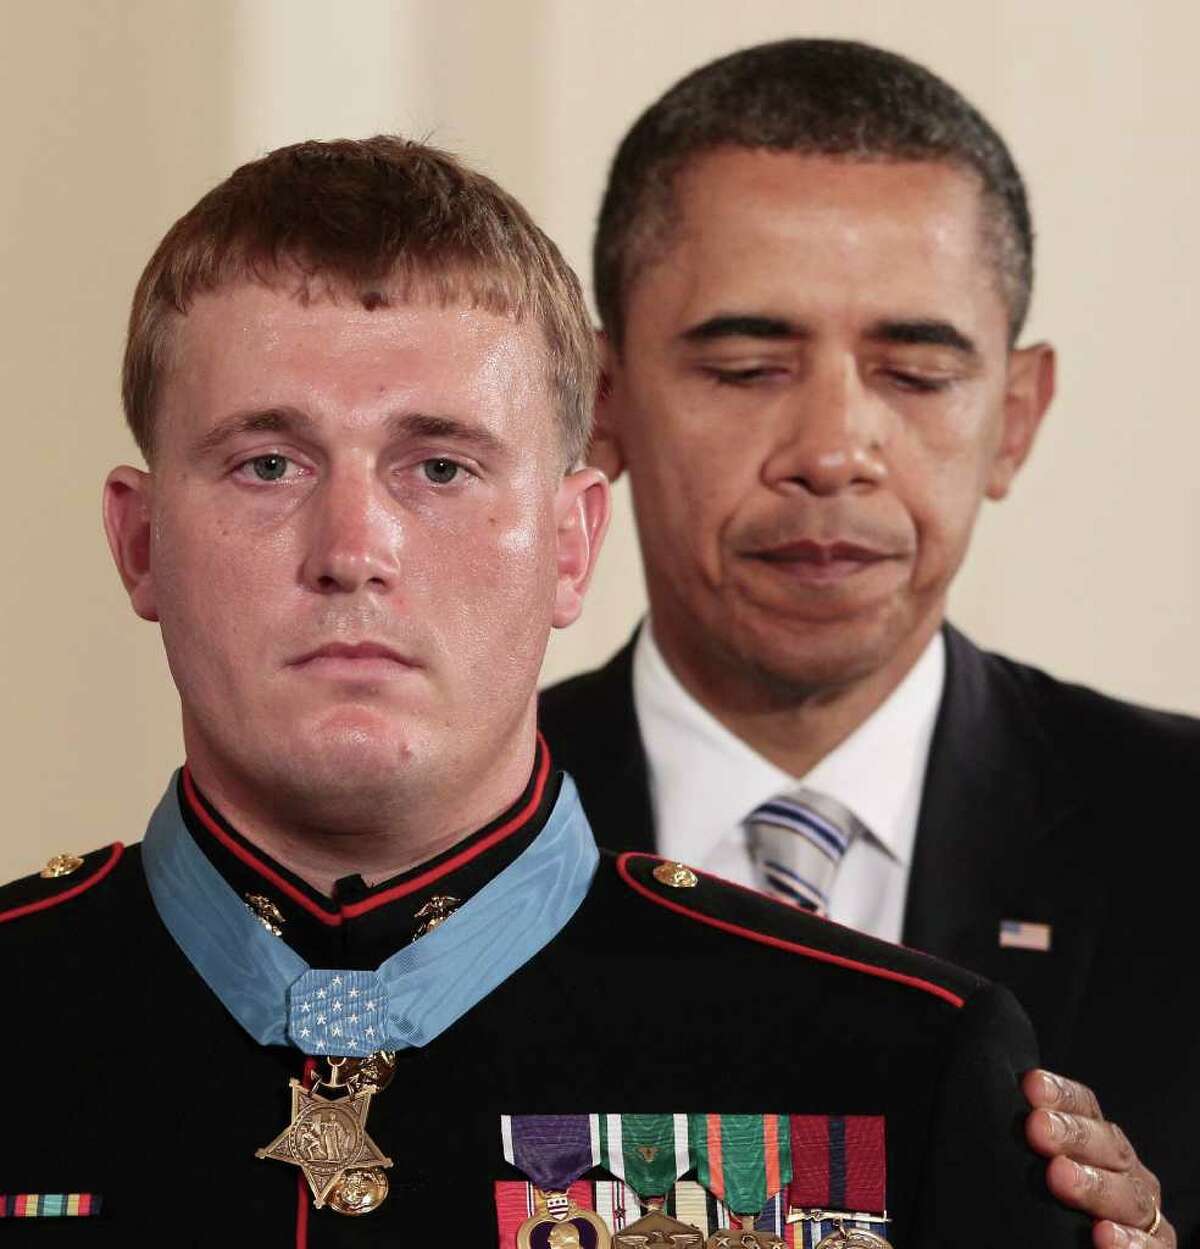 In this Sept. 15, 2011 file photo, President Barack Obama awards the Medal of Honor to former Marine Corps Cpl. Dakota Meyer, 23, from Greensburg, Ky., during a ceremony in the East Room of the White House in Washington.